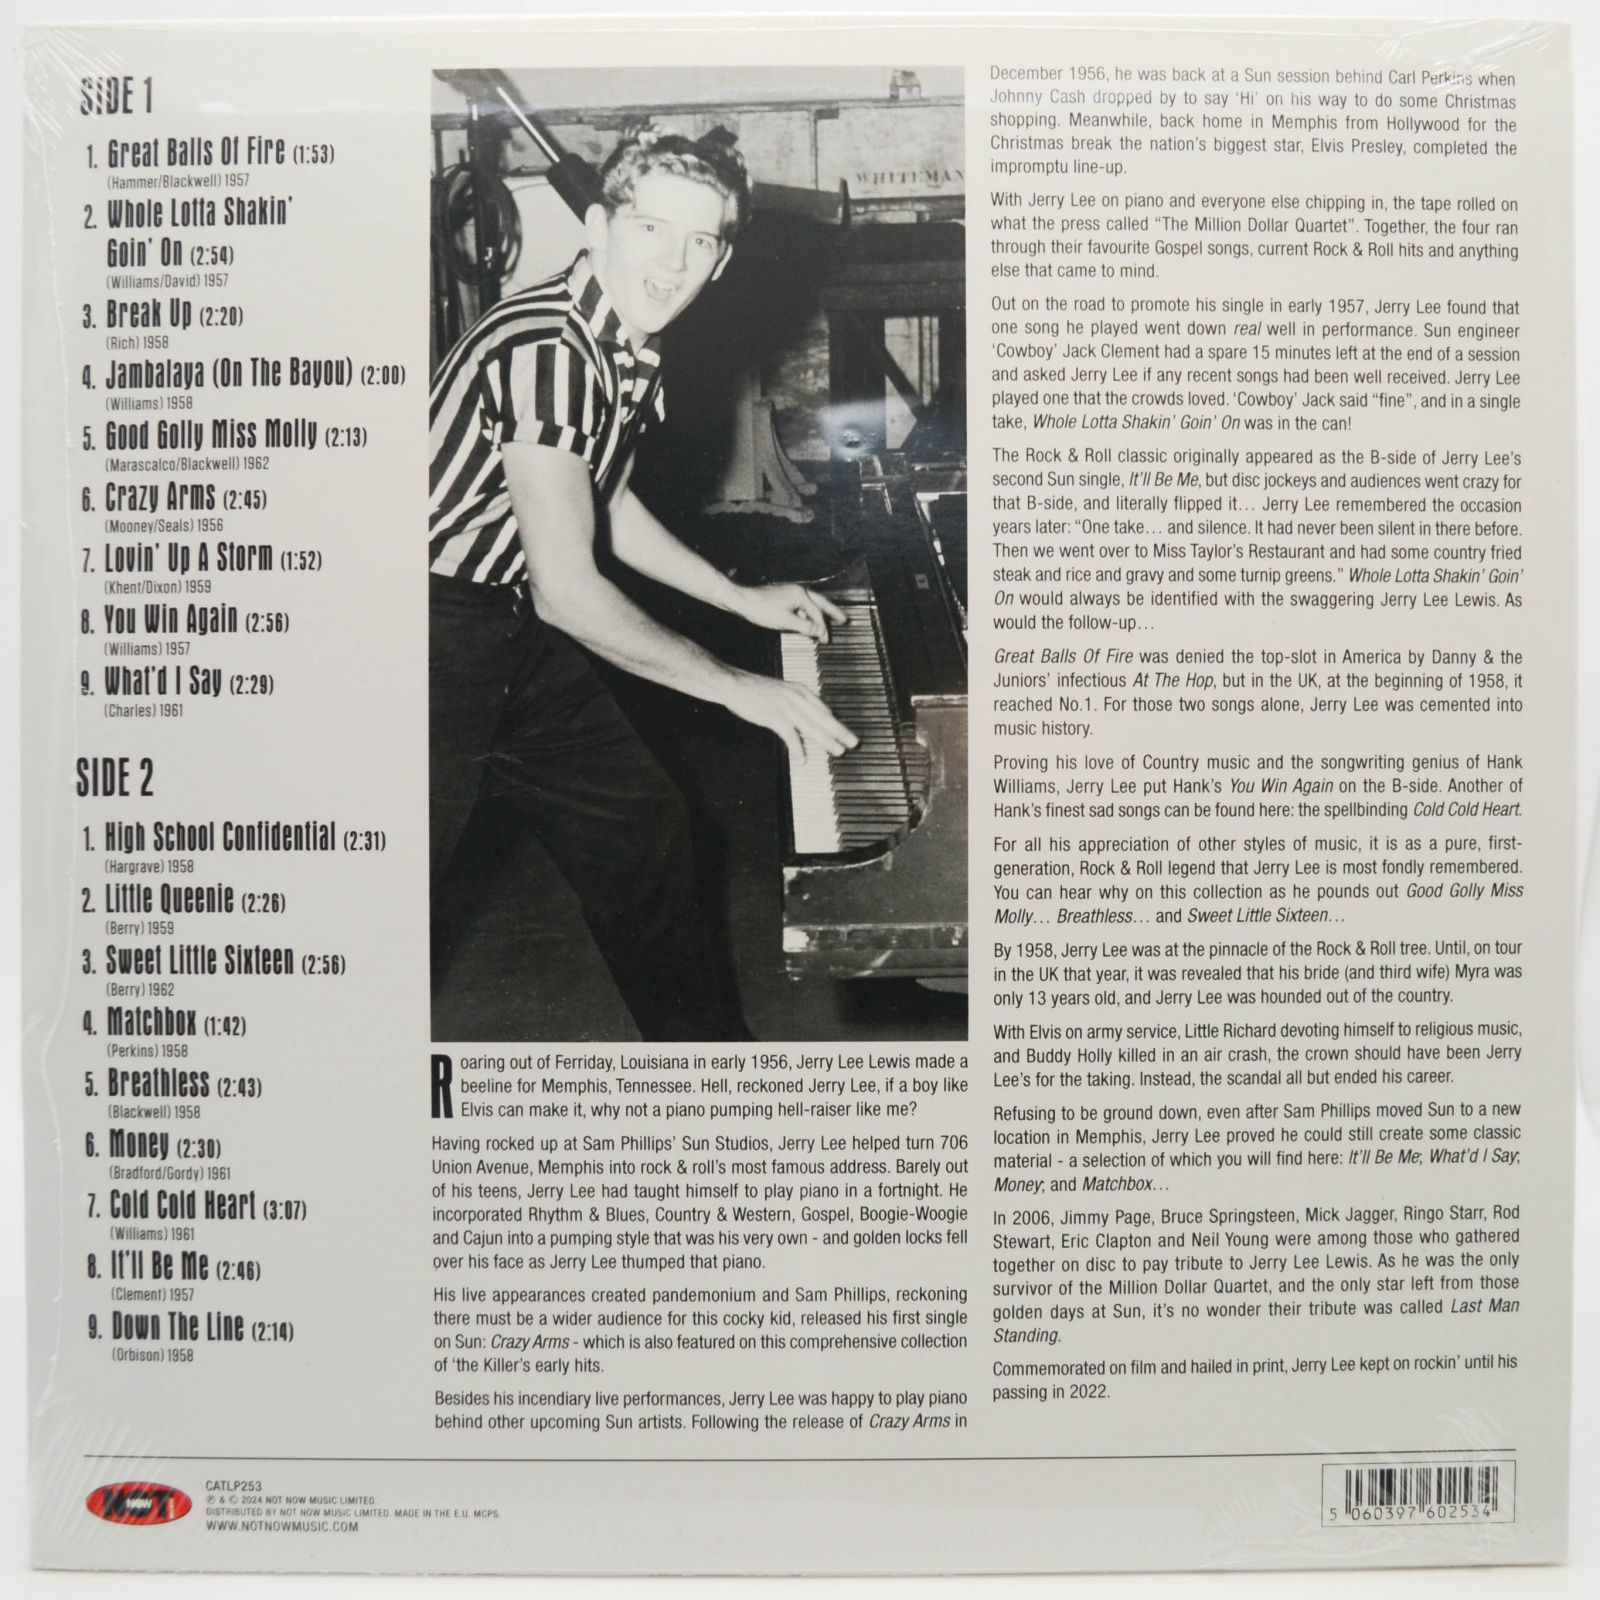 Jerry Lee Lewis — Greatest Hits, 2024